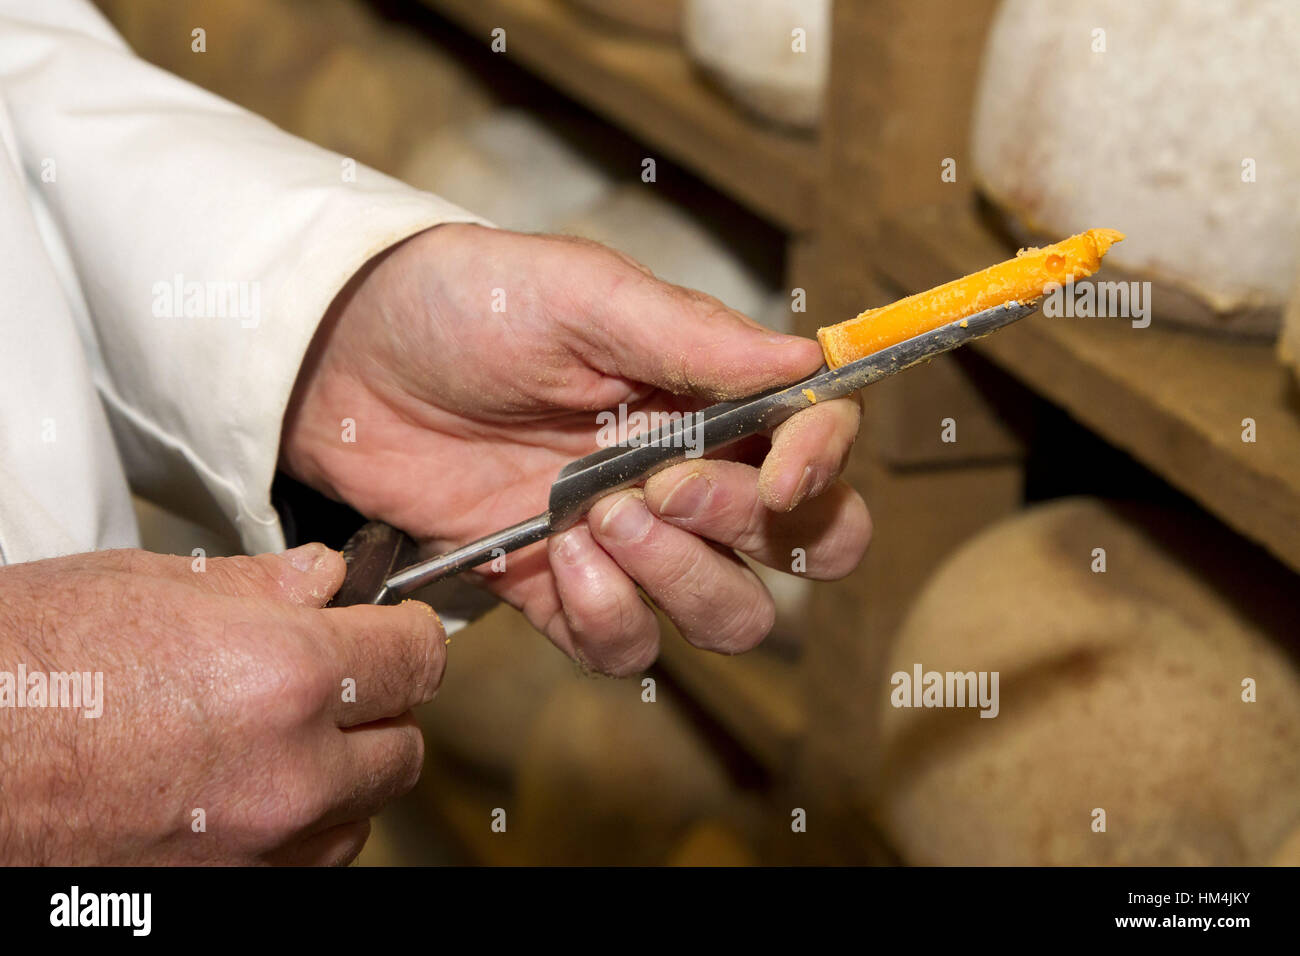 Hands of a cheesemaker holding a sample of Mimolette cheese. Stock Photo